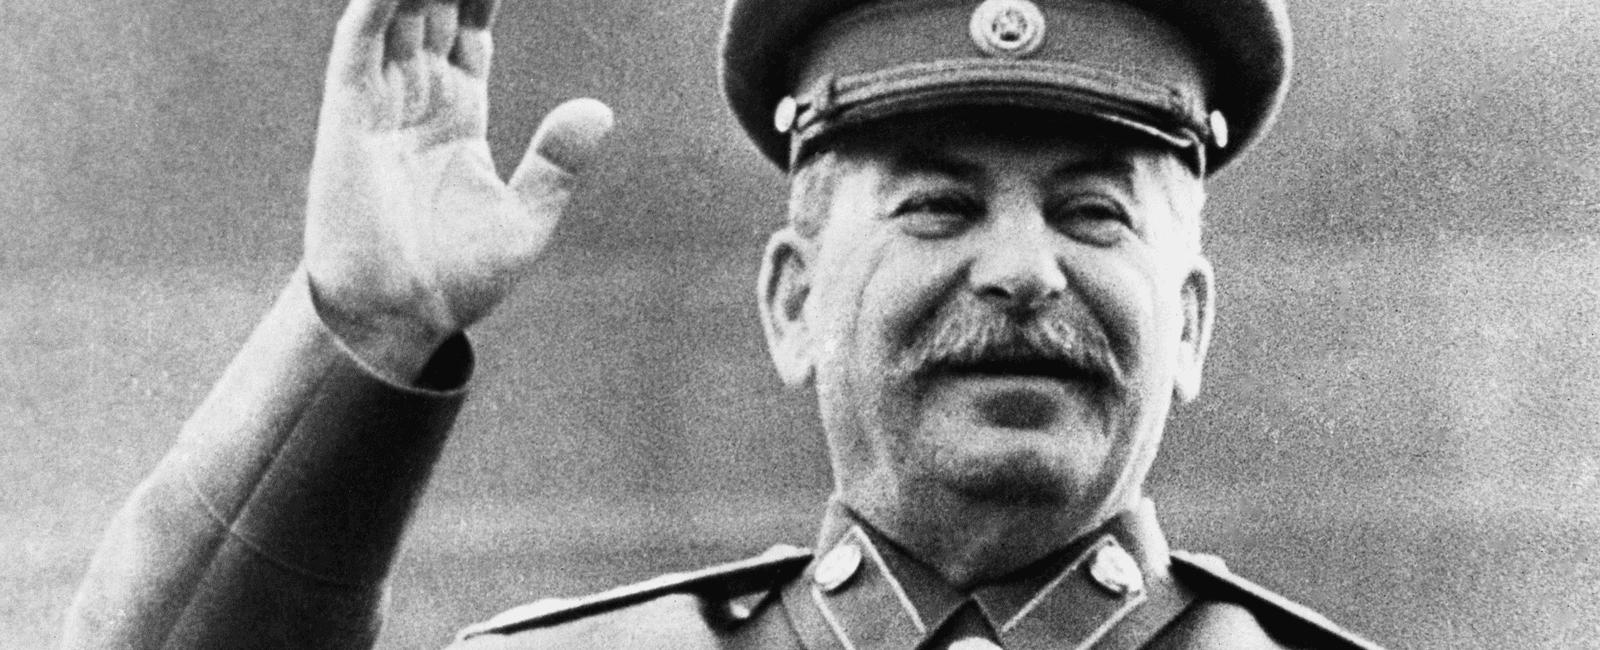 Joseph stalin the dictator of the ussr from 1929 1953 is believed to have killed between 20 60 million people